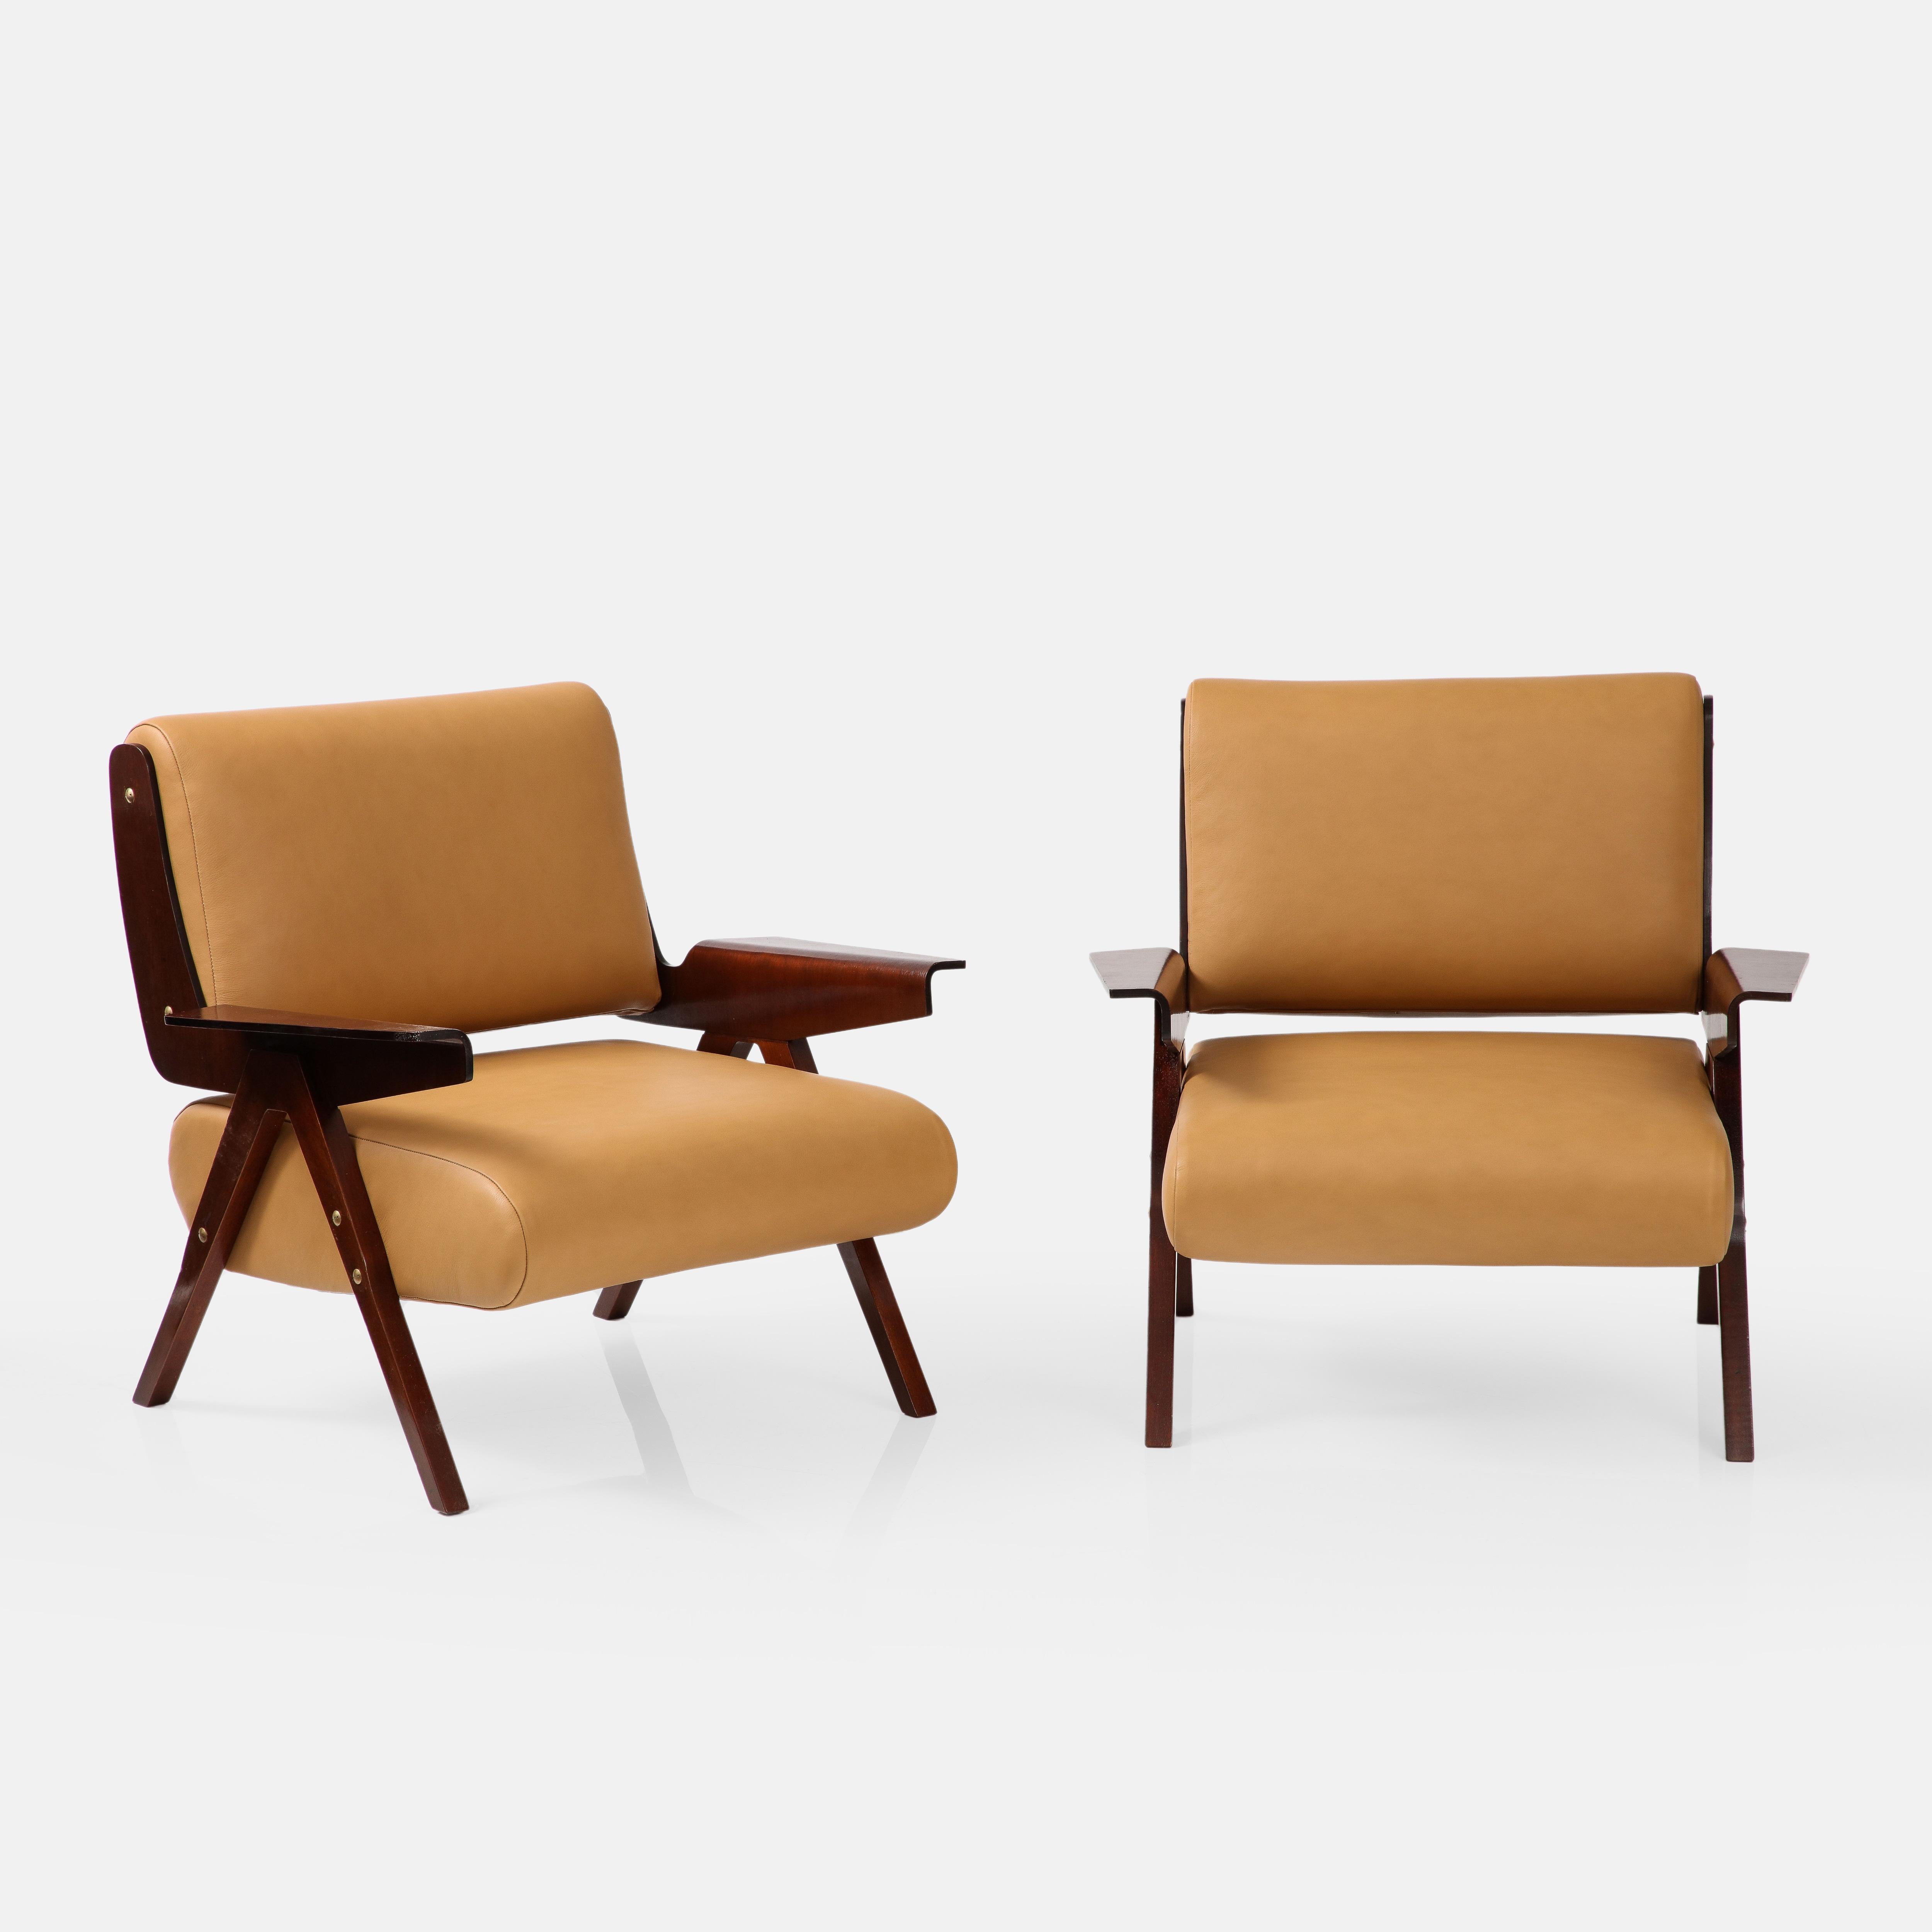 Gianfranco Frattini for Cassina rare pair of lounge chairs model 831 with frame in mahogany veneer and bent plywood with brass mounts, and camel leather upholstery, Italy, 1955.. These sculptural model lounge chairs are an iconic Frattini design